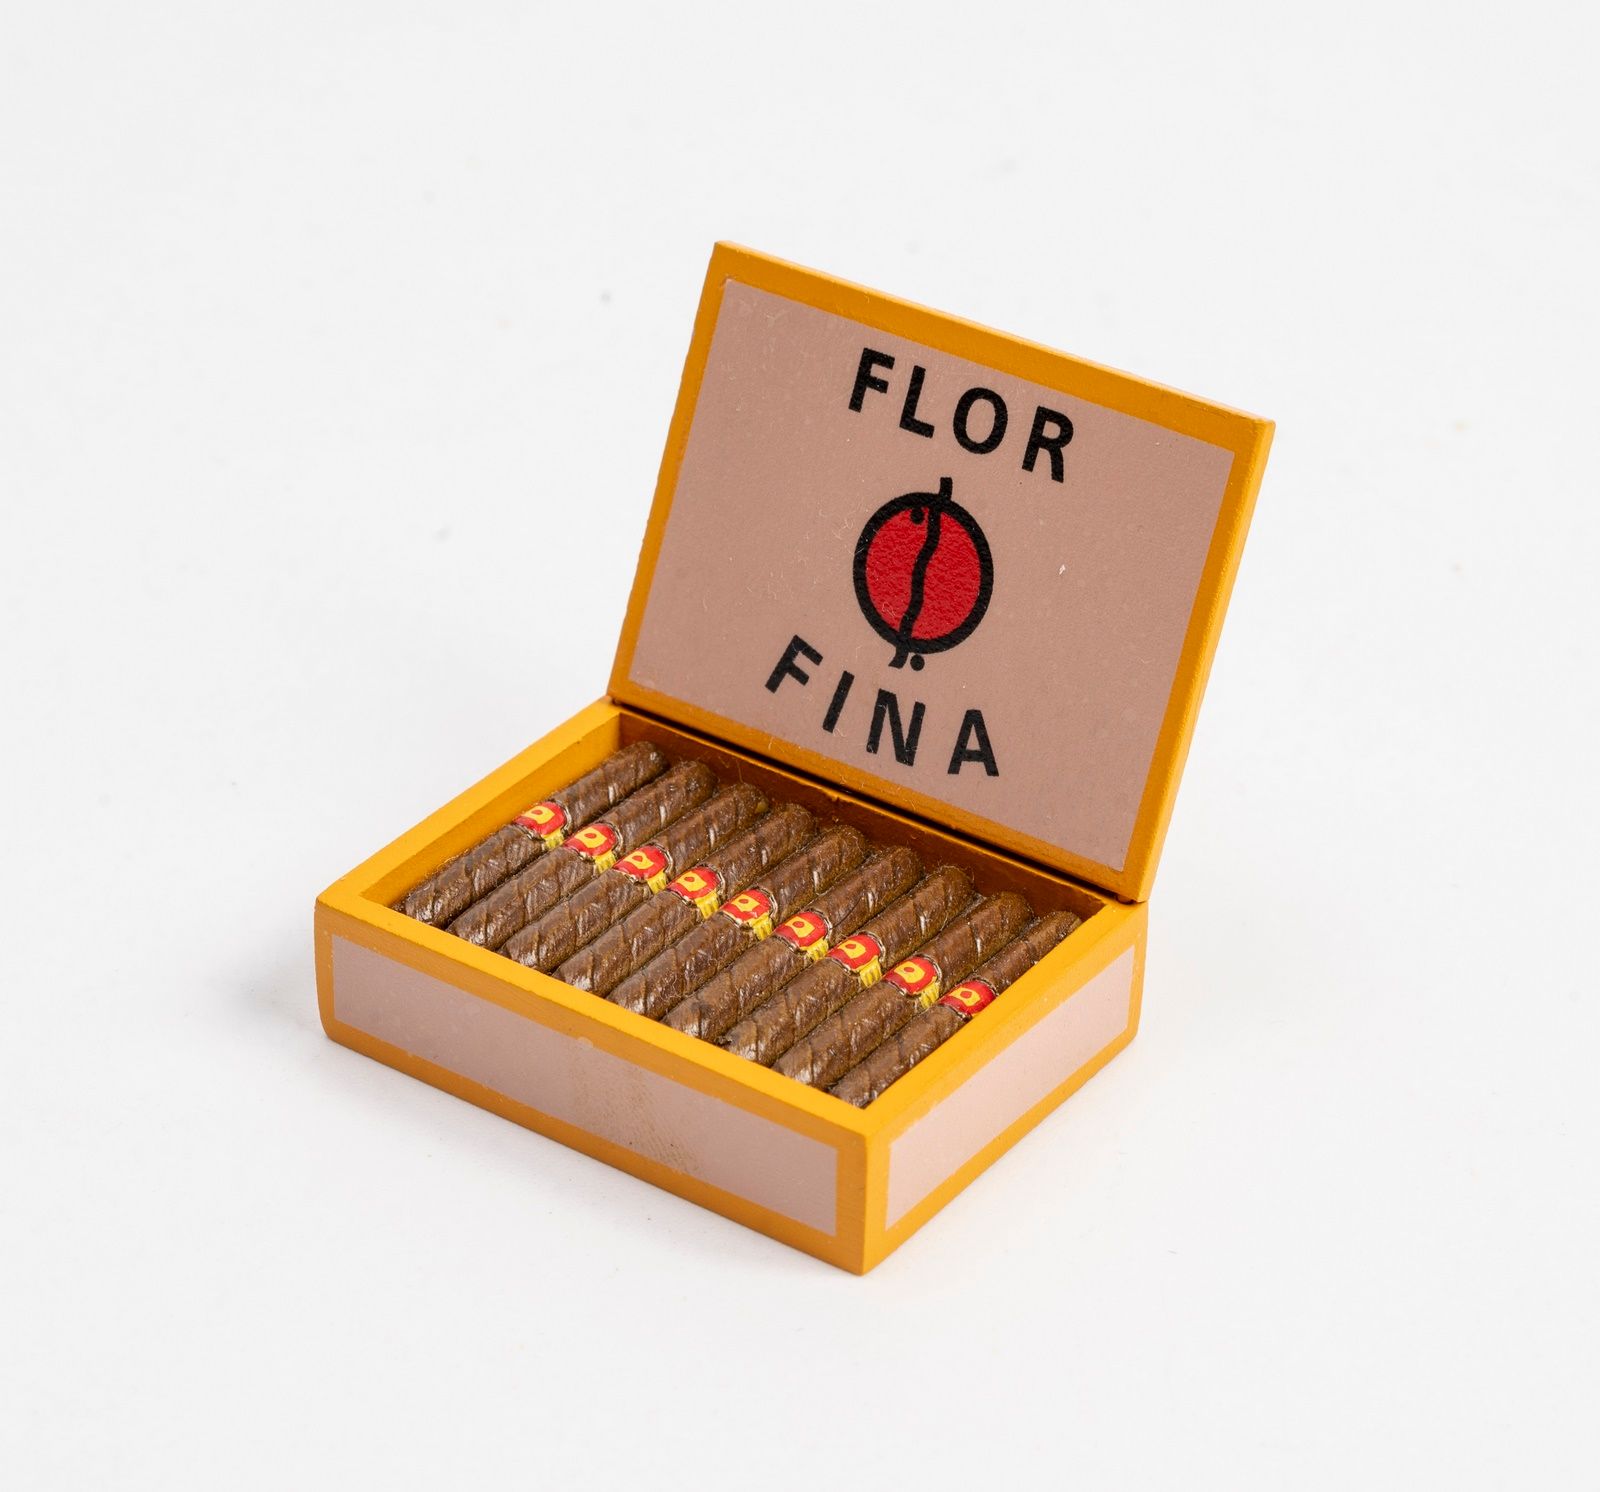 Null The Pharaoh's Cigars



HERGÉ/PIXI



Hergé : The Objects of the Myth 



T&hellip;